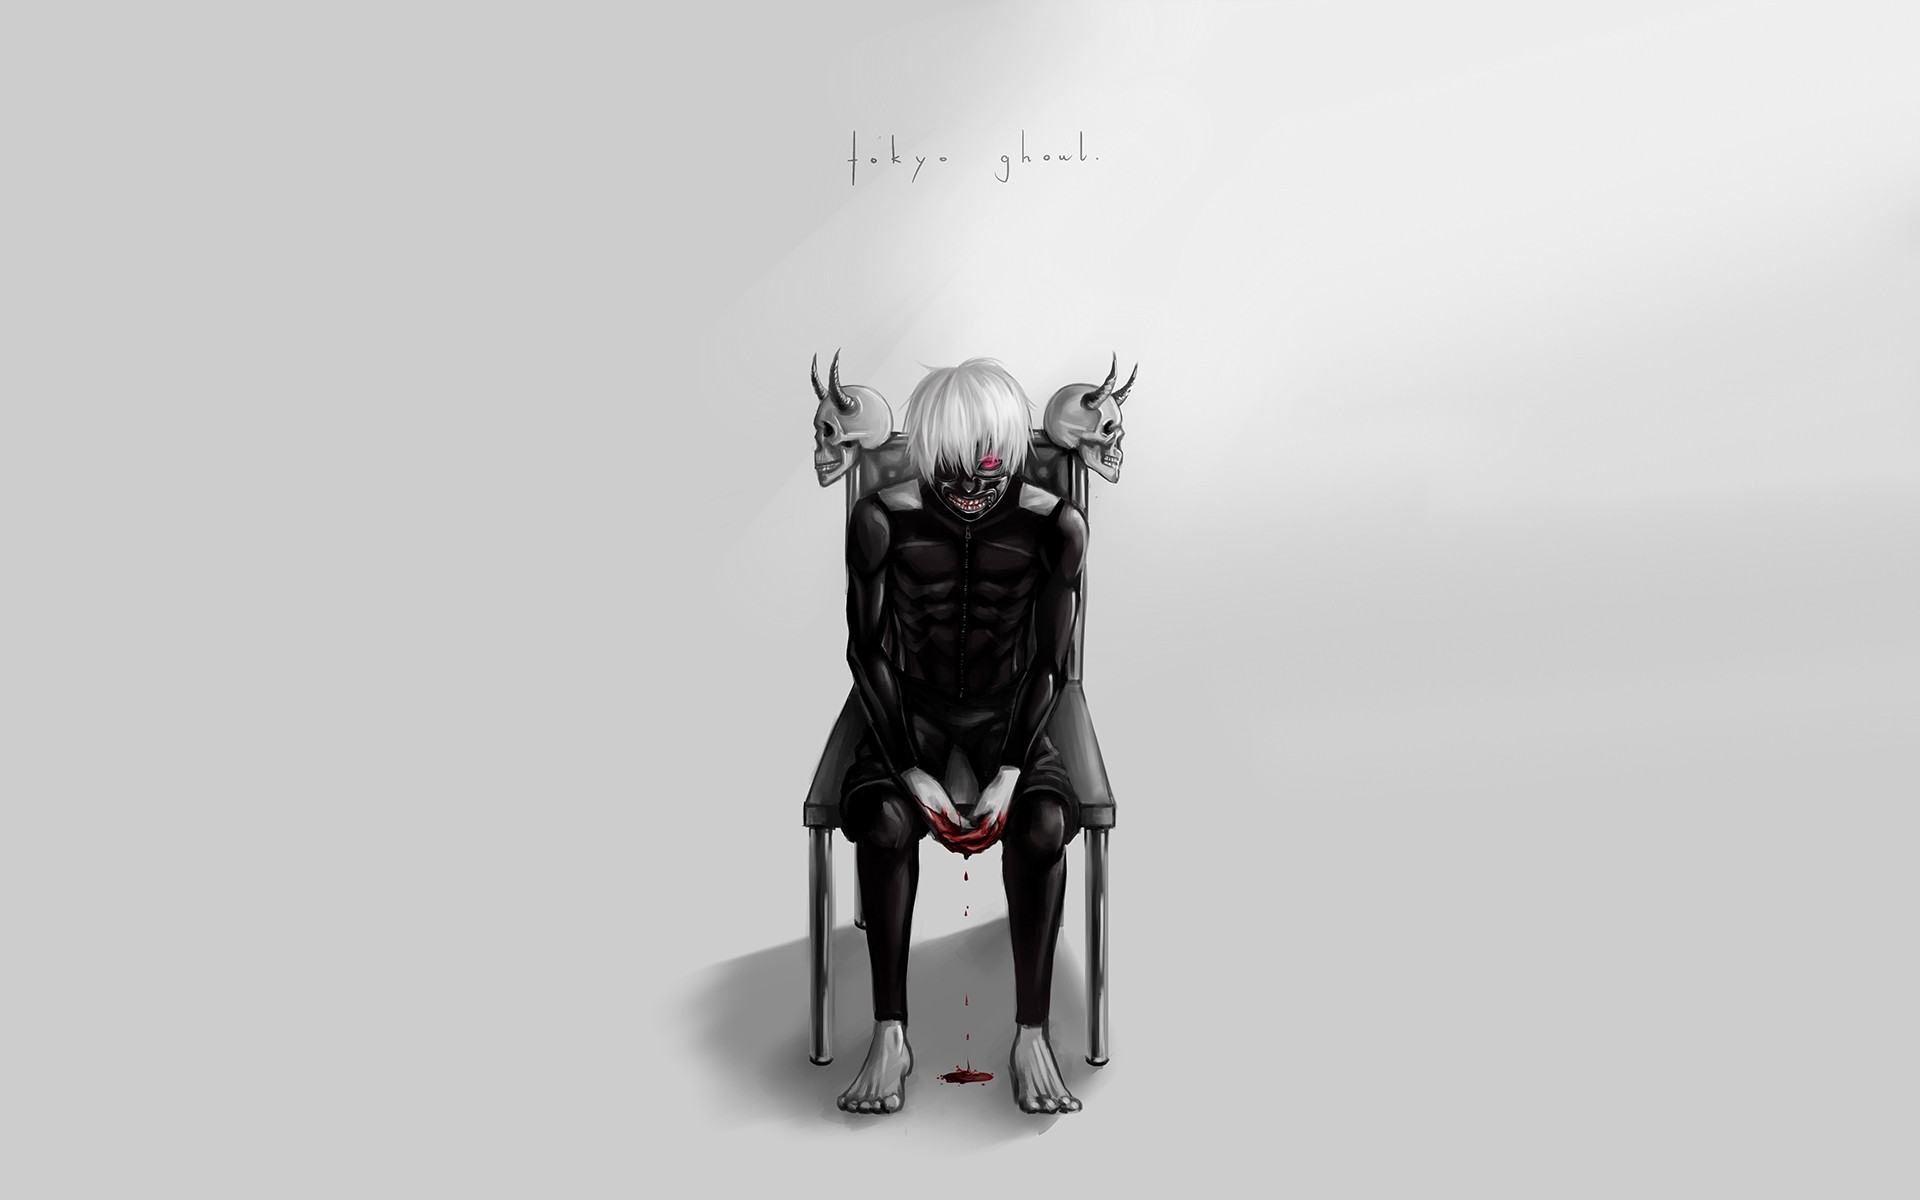  Tokyo  Ghoul  wallpaper  HD    Download free cool backgrounds  